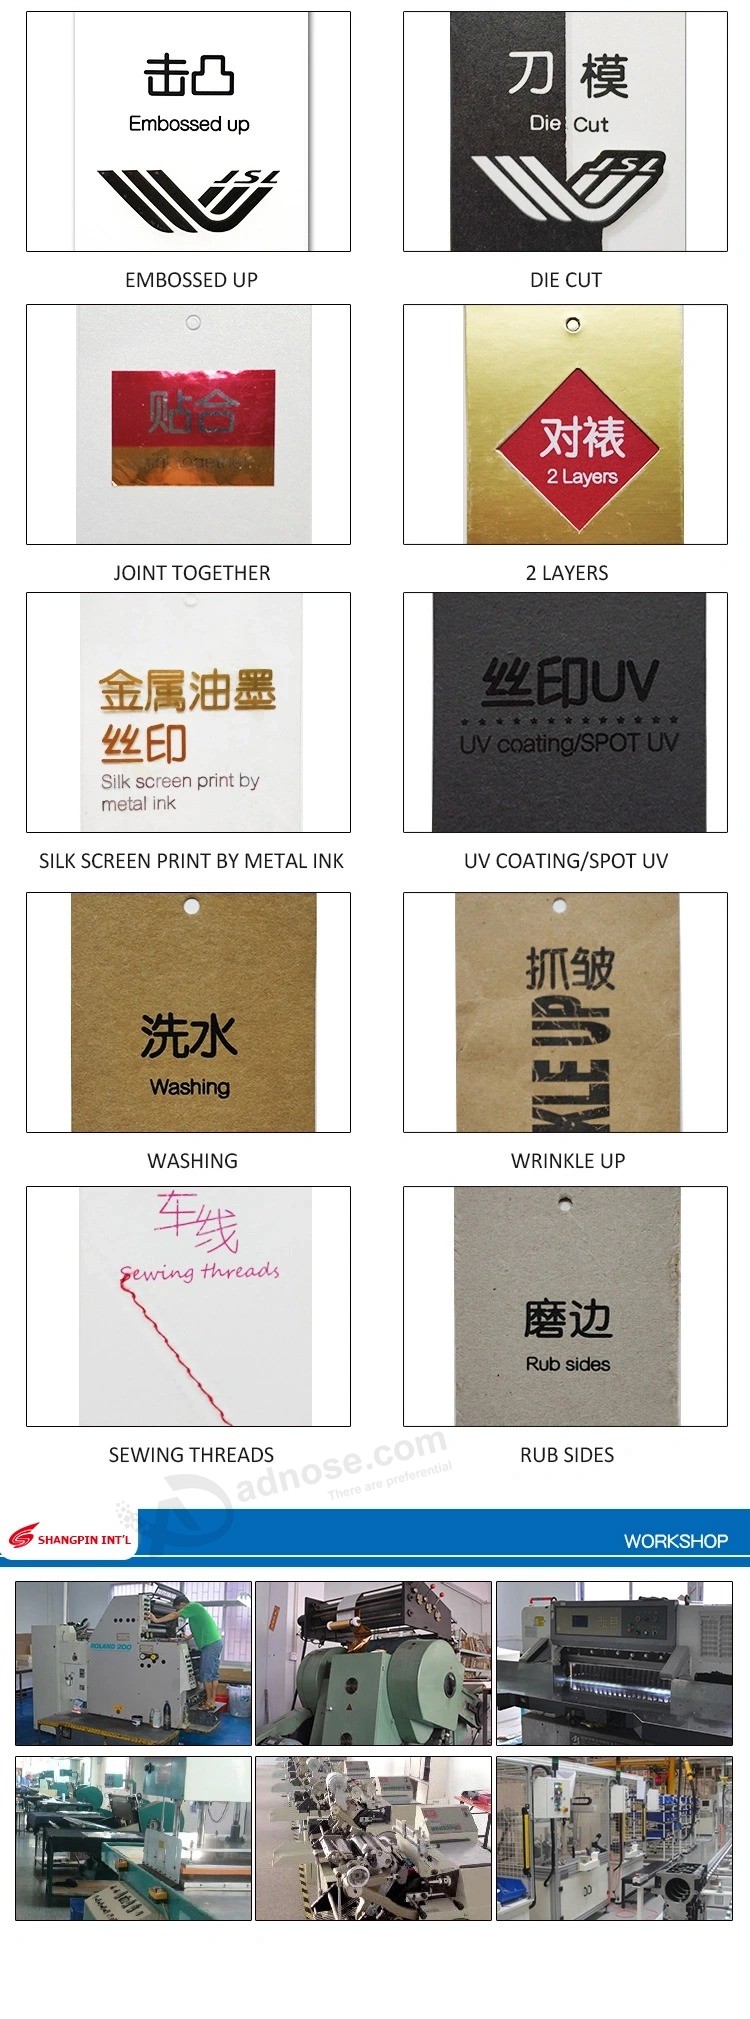 China factory Best quality Product custom Design printing Paper hang Tags